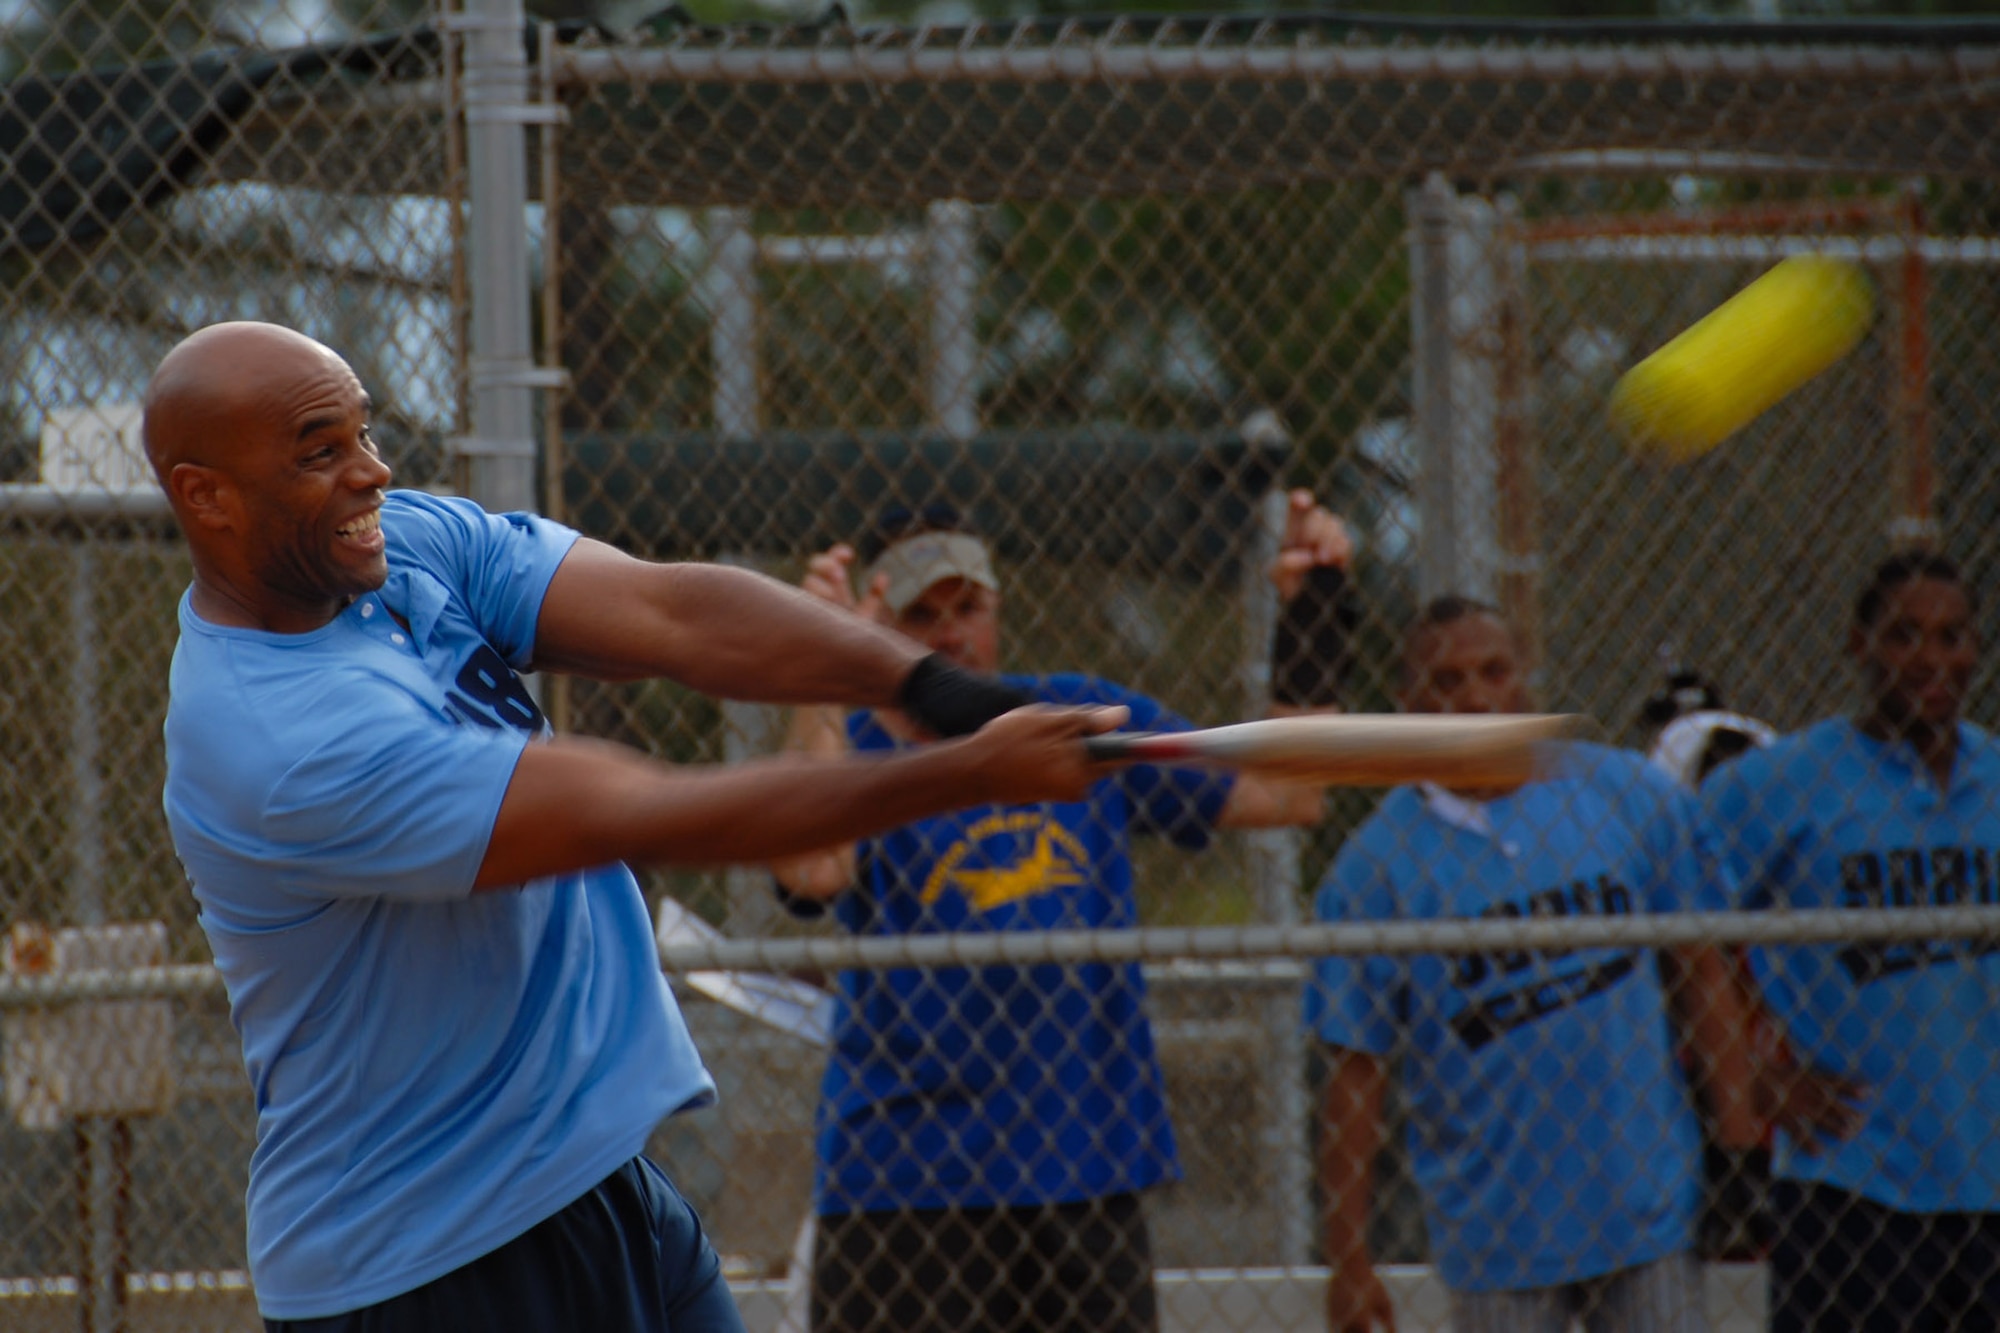 Senior Master Sgt. Sammy Gipson of the 908th Airlift Wing slams a home run during the Maxwell-Gunter intramural softball championship game July 30 at Maxwell's softball complex. The 908th went on to win the championship for the second consecutive year. (U.S. Air Force photo/Jamie Pitcher)